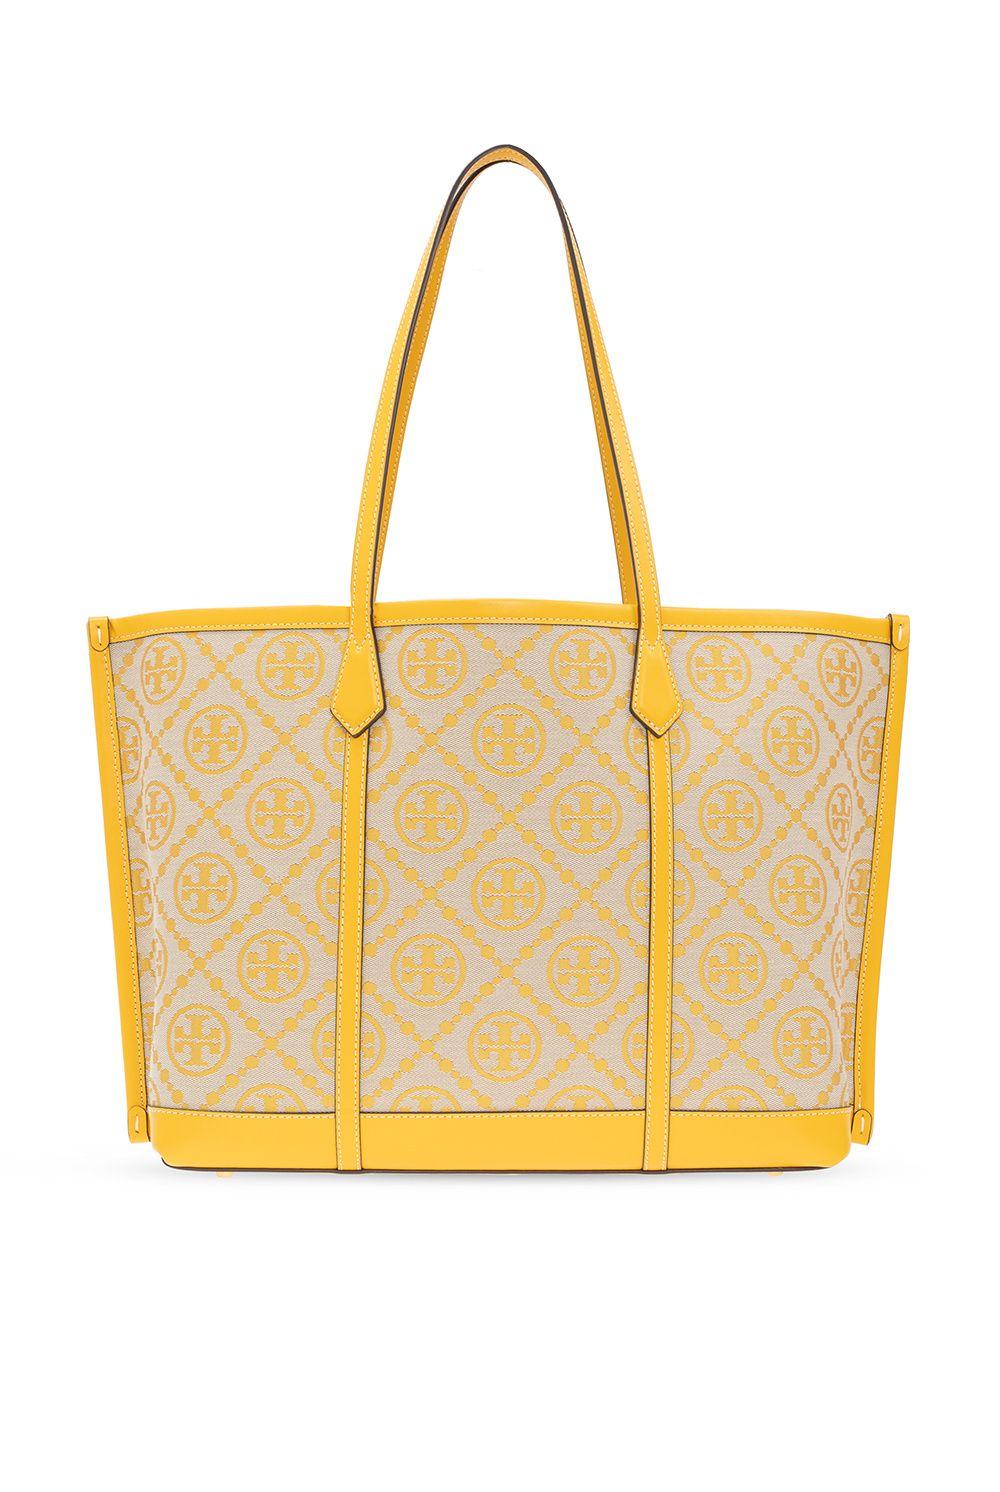 Tory Burch, Bags, Tory Burch Monogram Perry Large Tote